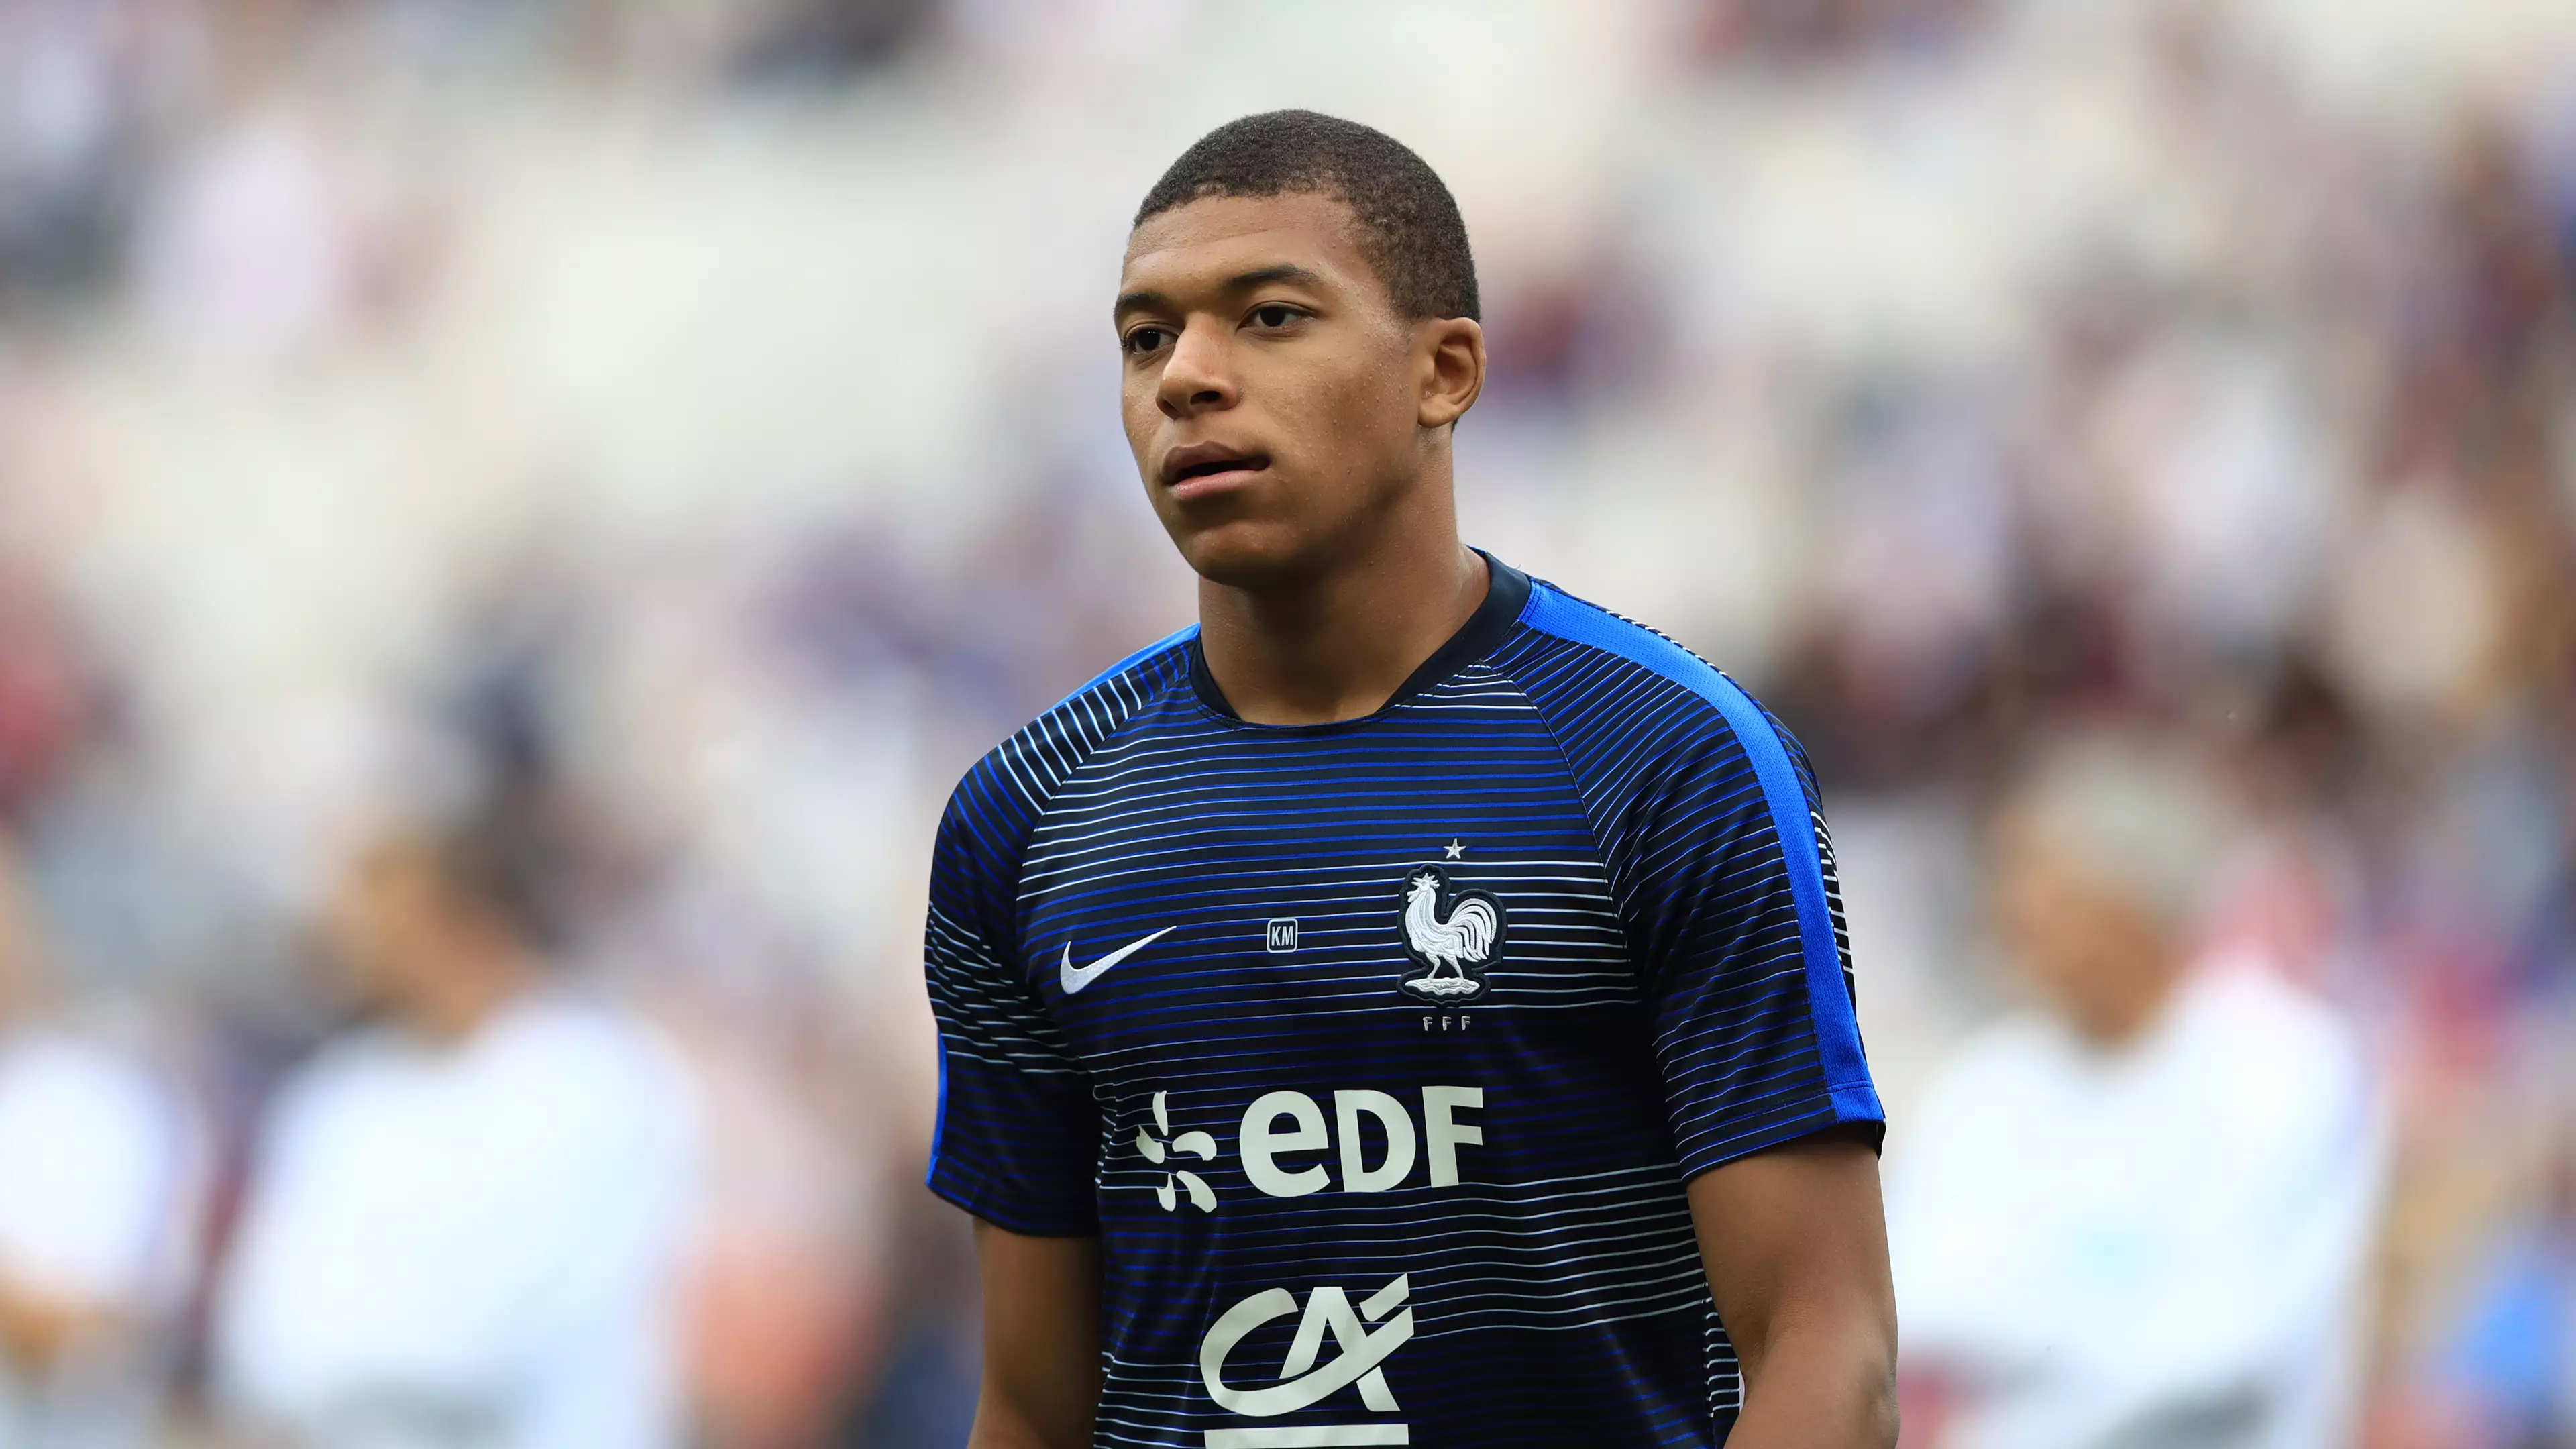 There's One Major Detail Stopping Kylian Mbappe's Move To PSG